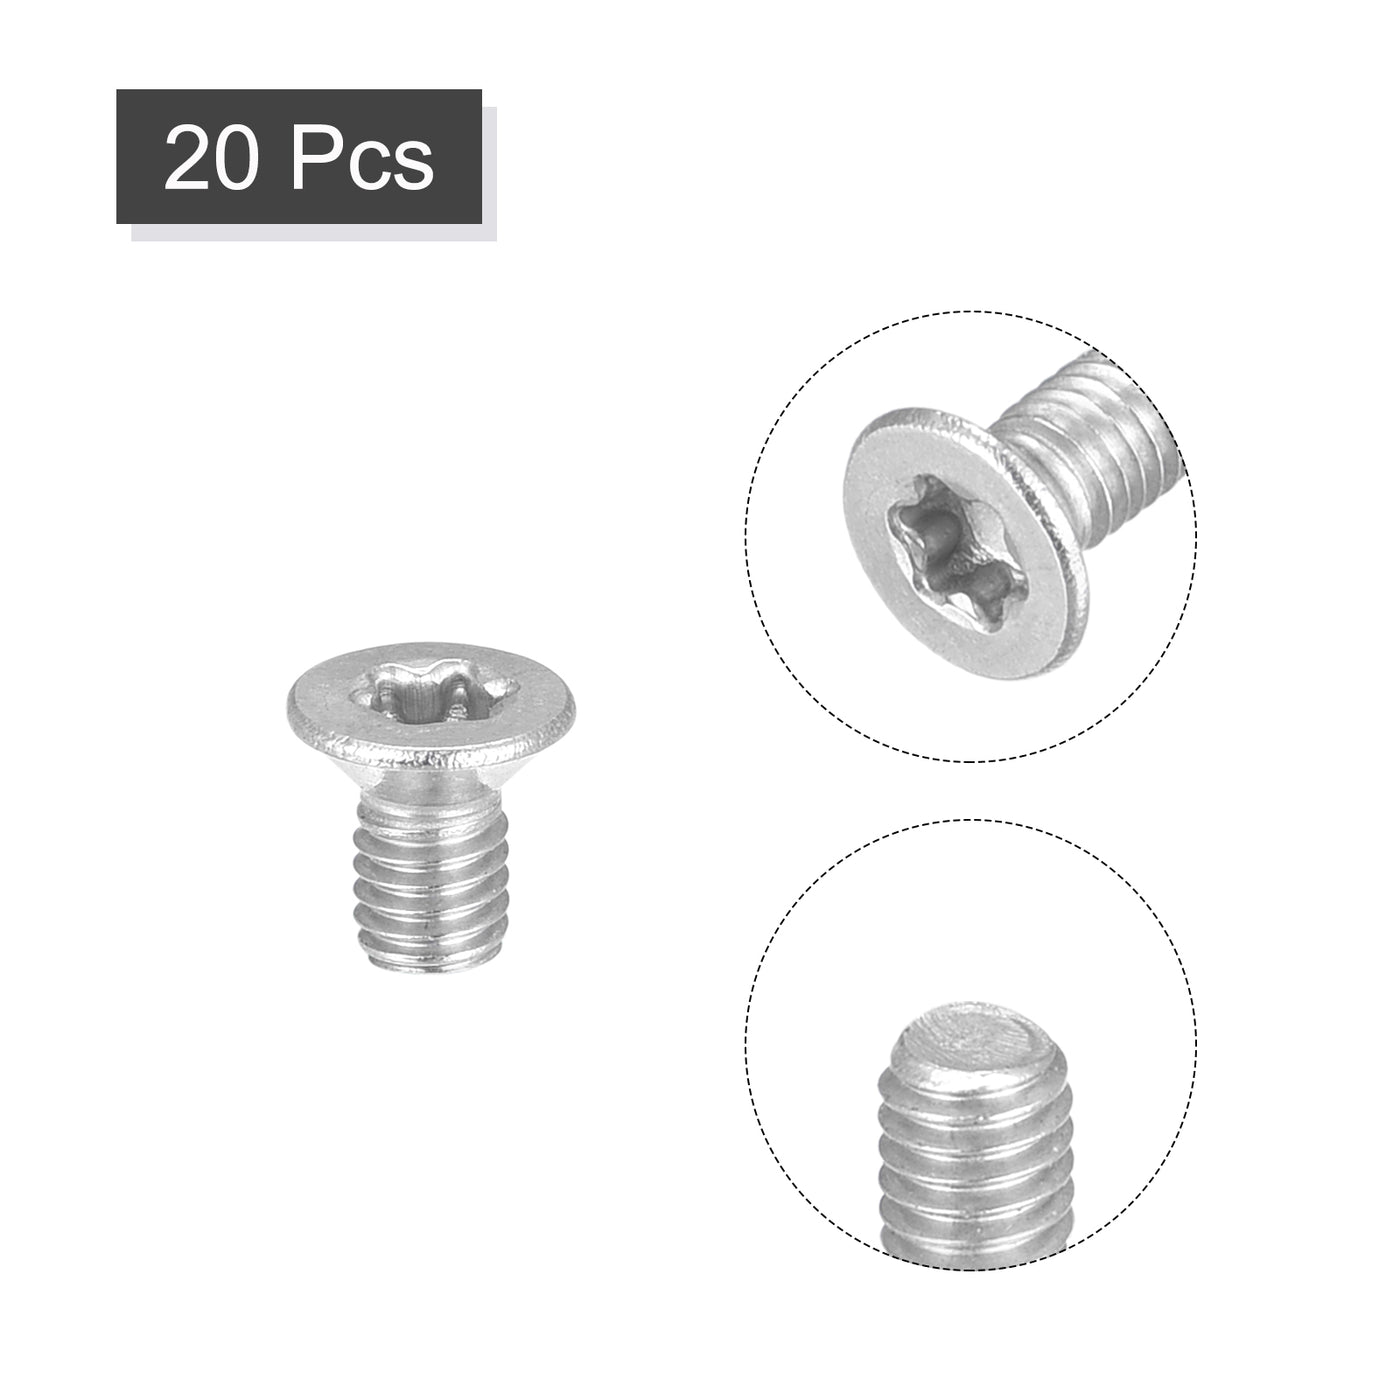 uxcell Uxcell M3x5mm Torx Security Screws, 20pcs 316 Stainless Steel Countersunk Head Screw